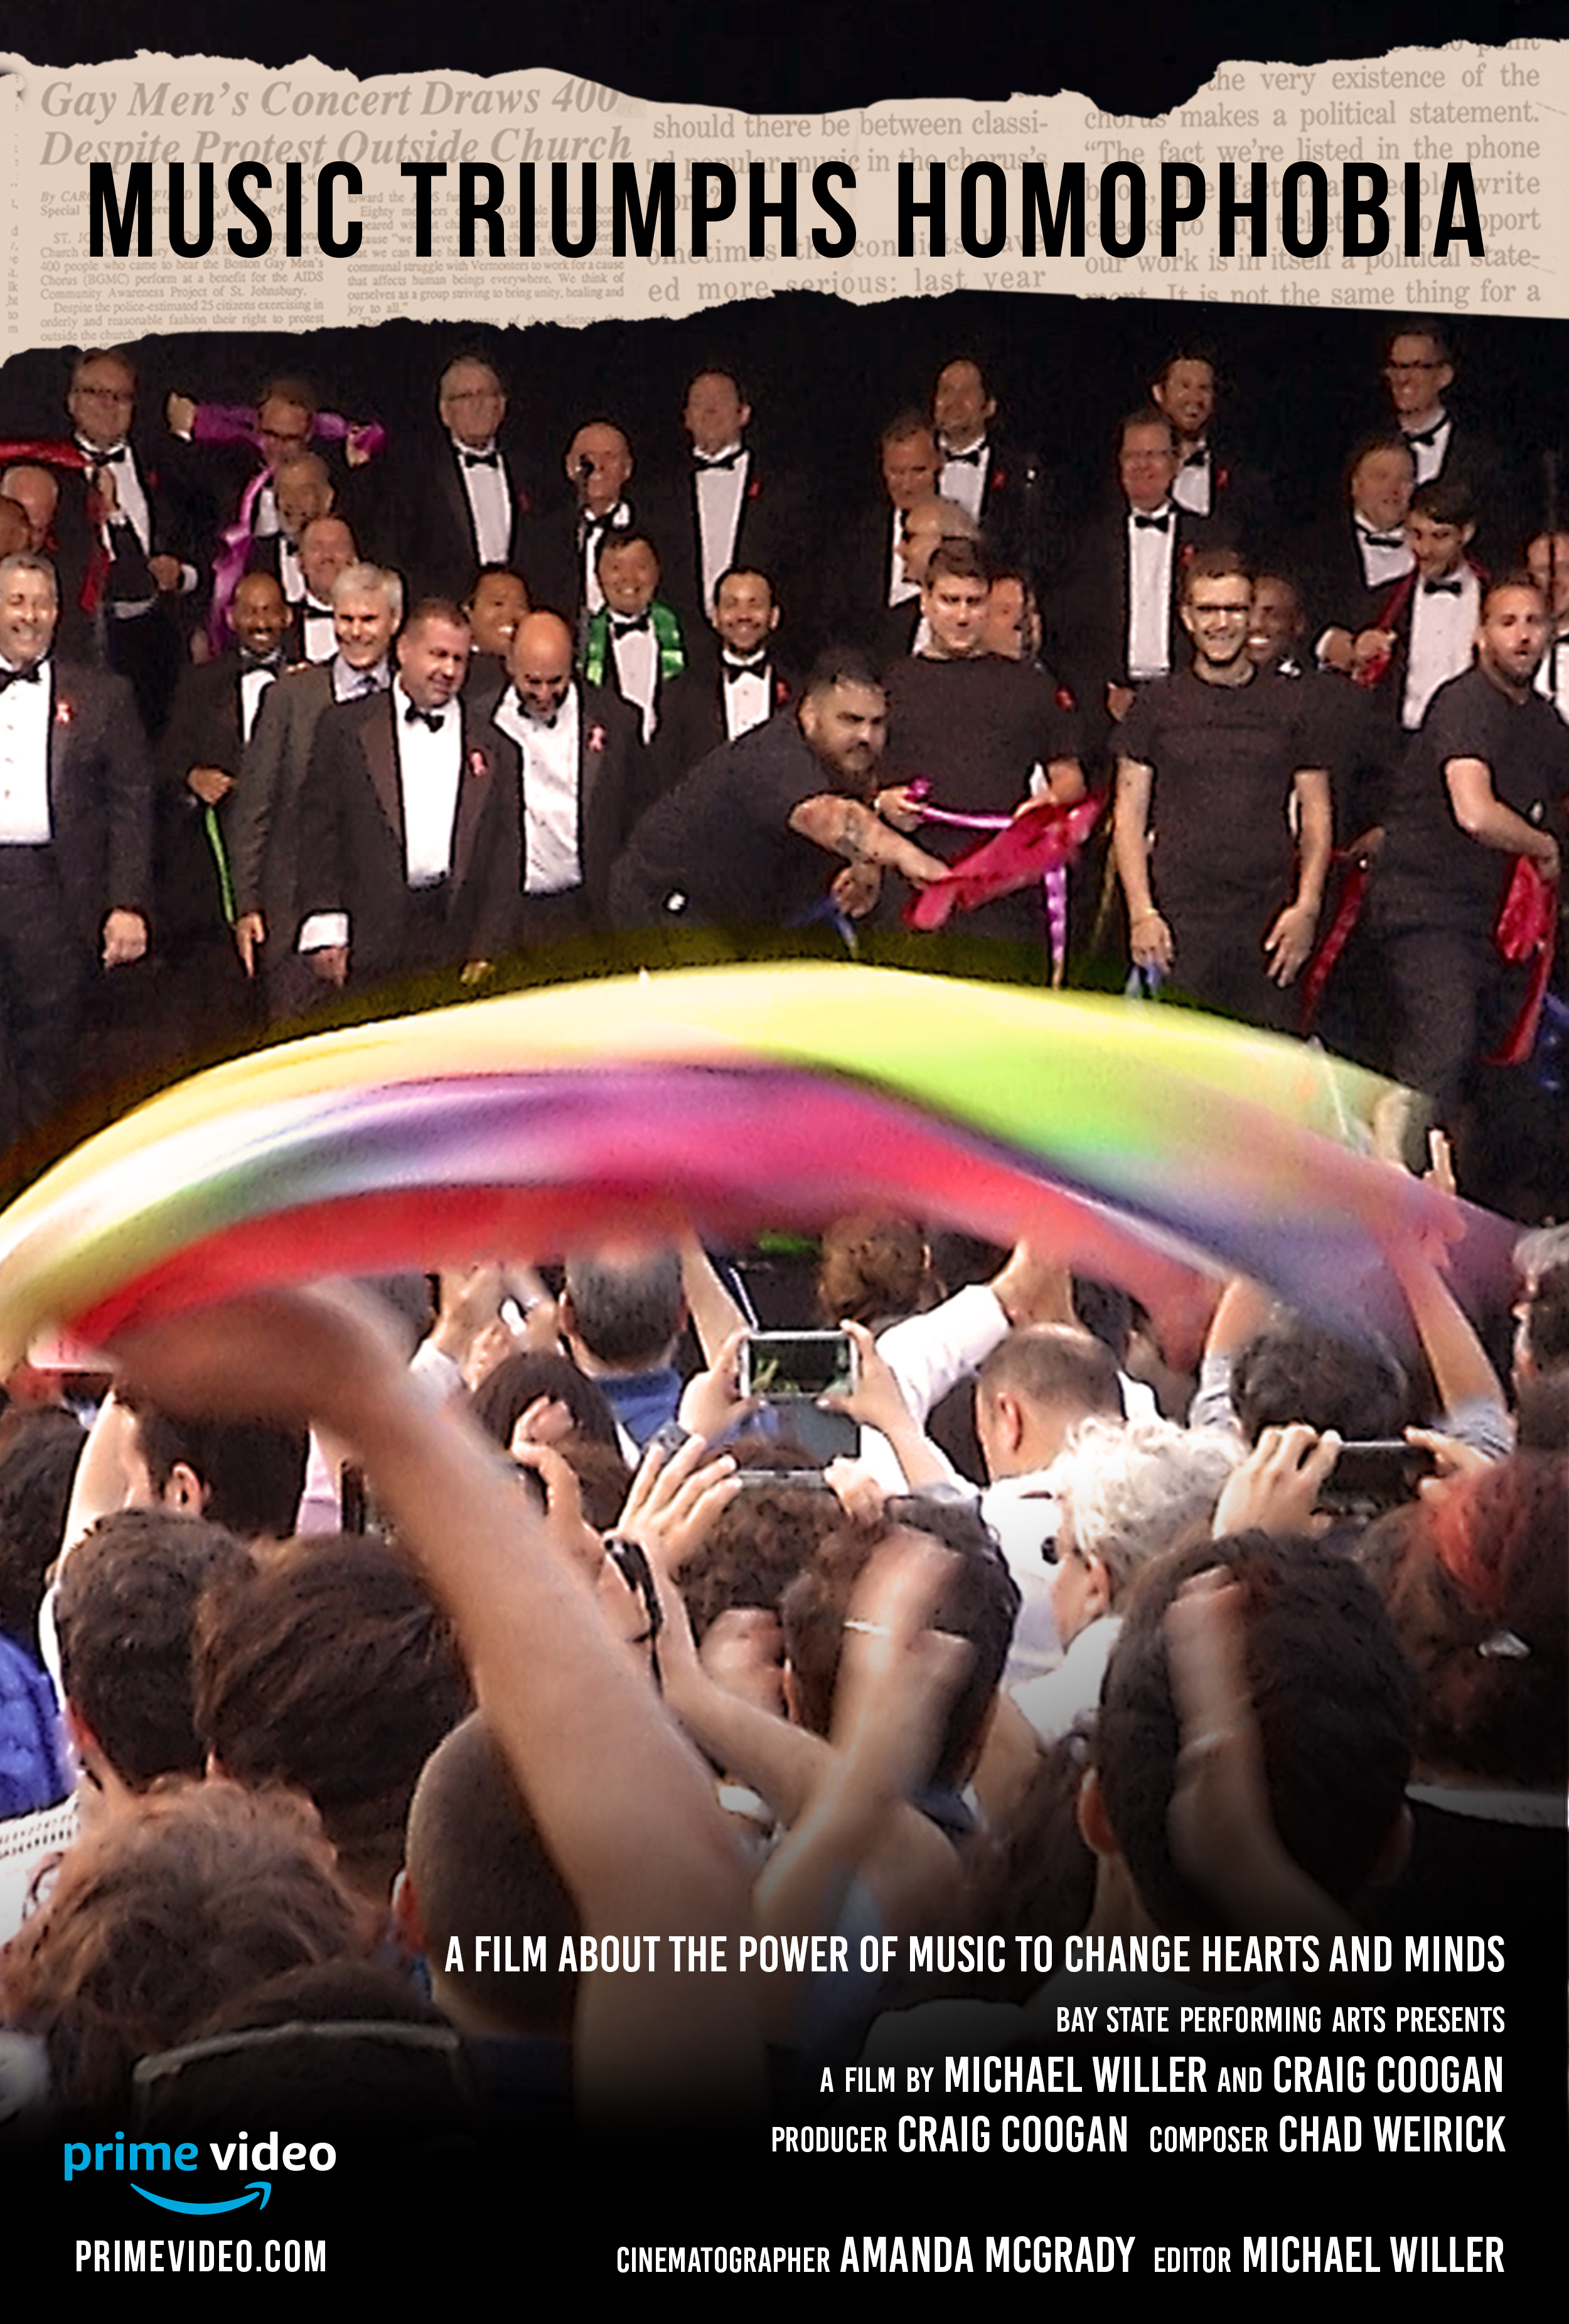 Poster titled Music Triumphs Homophobia showing the Boston Gay Men's Chorus and a rainbow pride flag